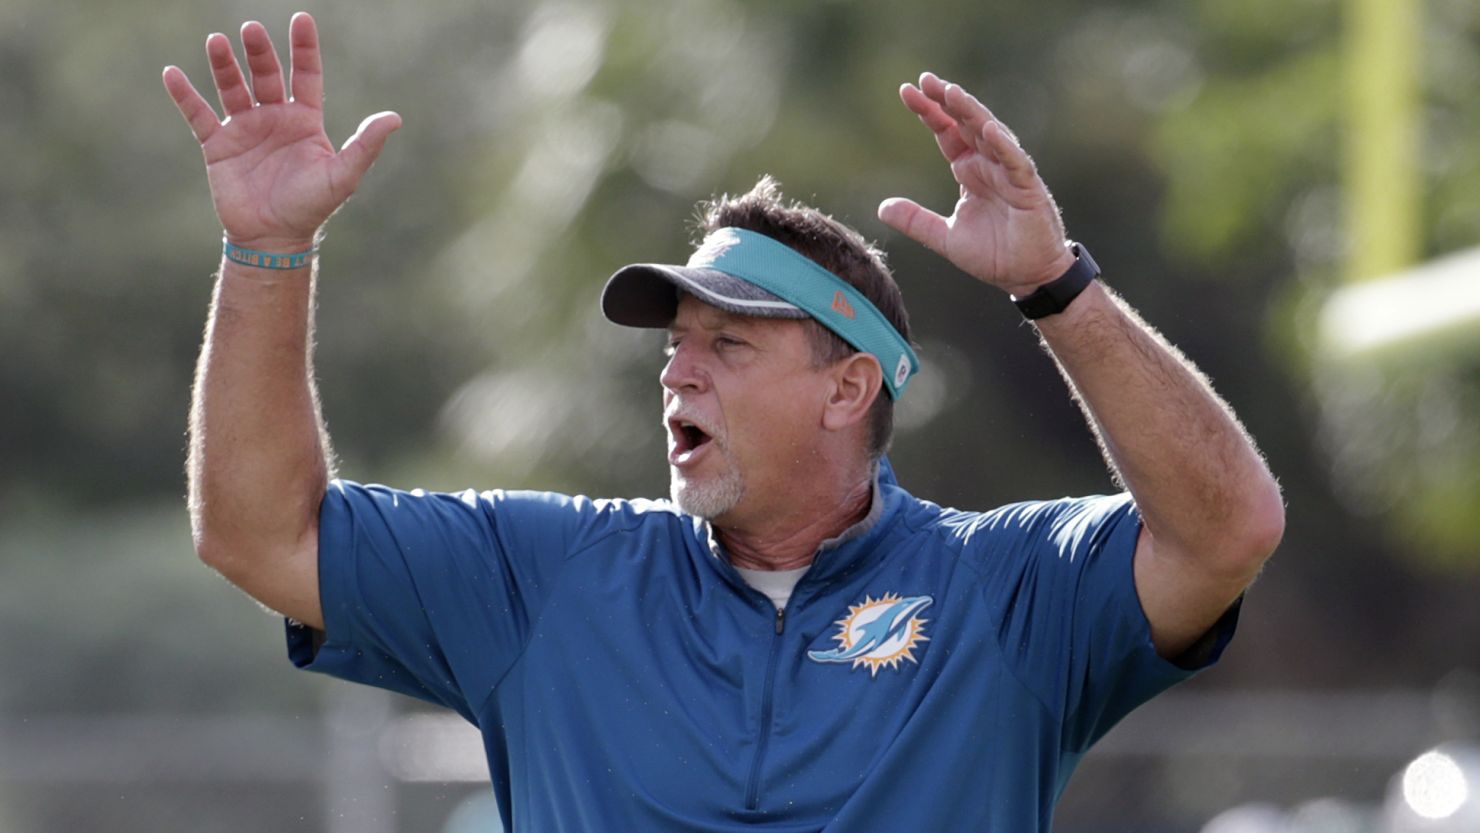 FILE - In this Aug. 16, 2016, file photo, Miami Dolphins offensive line coach Chris Foerster watches as players do drills during practice at NFL football training camp in Davie, Fla. The NFL and the Miami Dolphins say they're aware of a social media video allegedly showing offensive line coach Chris Foerster snorting a white powdery substance. NFL spokesman Brian McCarthy said Monday, Oct. 9, 2017, the league will review the 56-second video, which was posted on Facebook and Twitter. (AP Photo/Lynne Sladky, File)